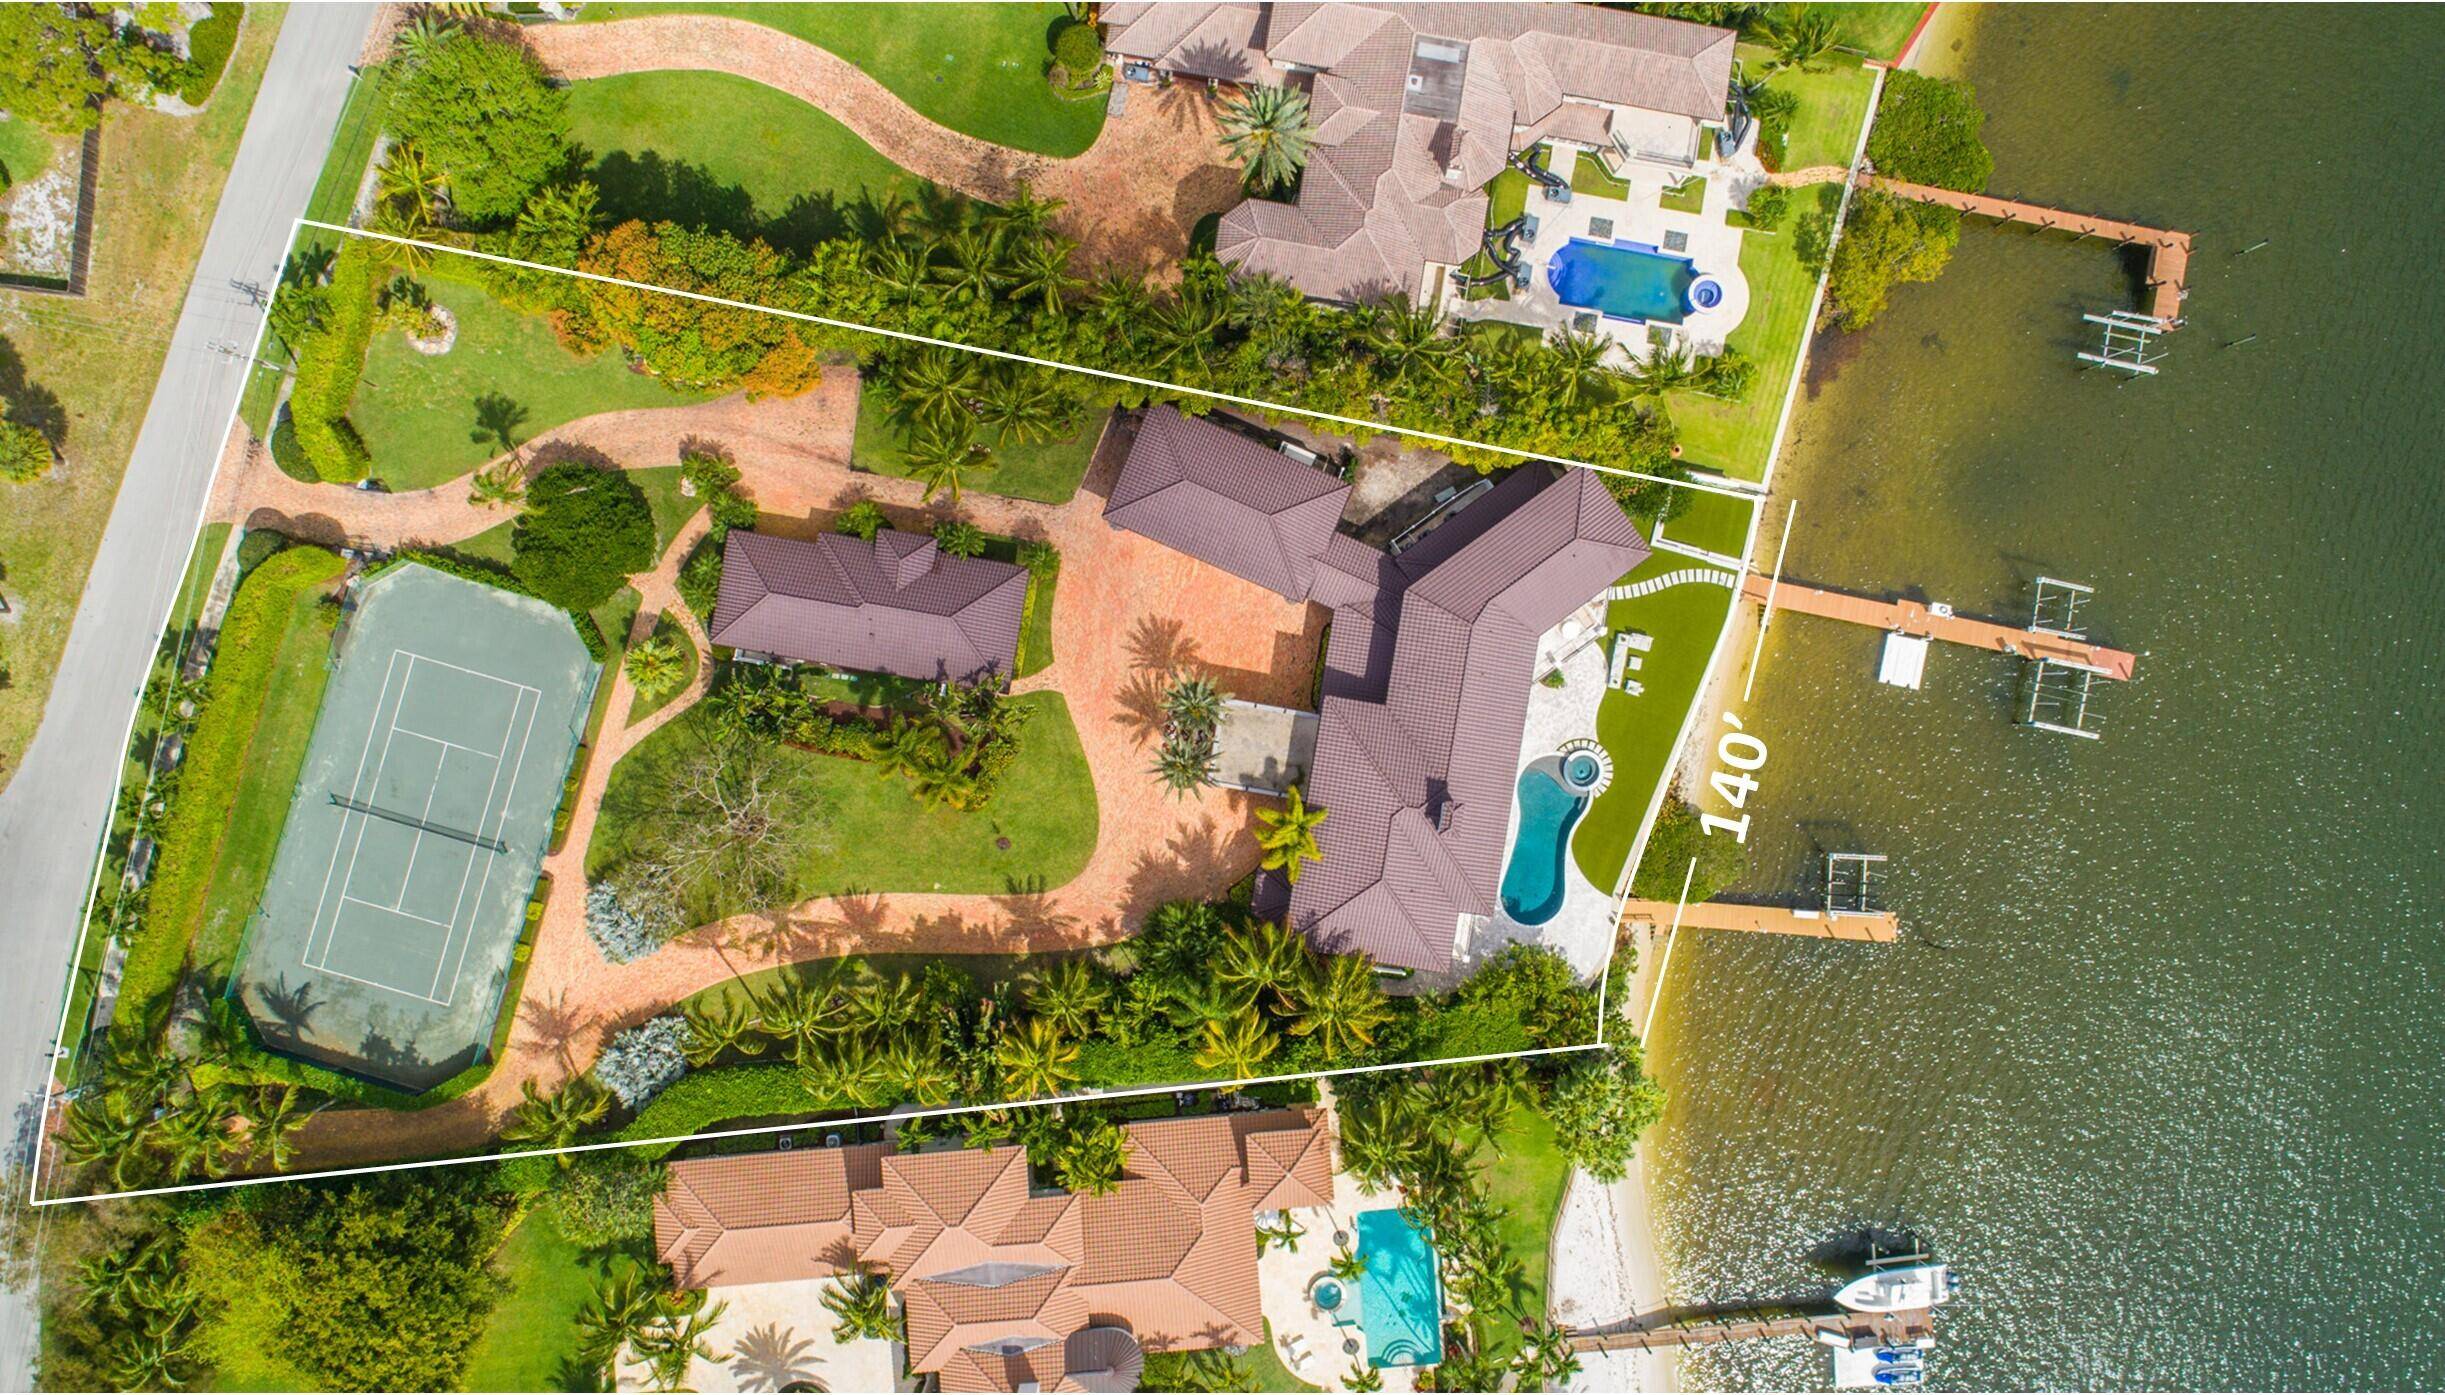 Panoramic River Views of the Loxahatchee River awaits for you.